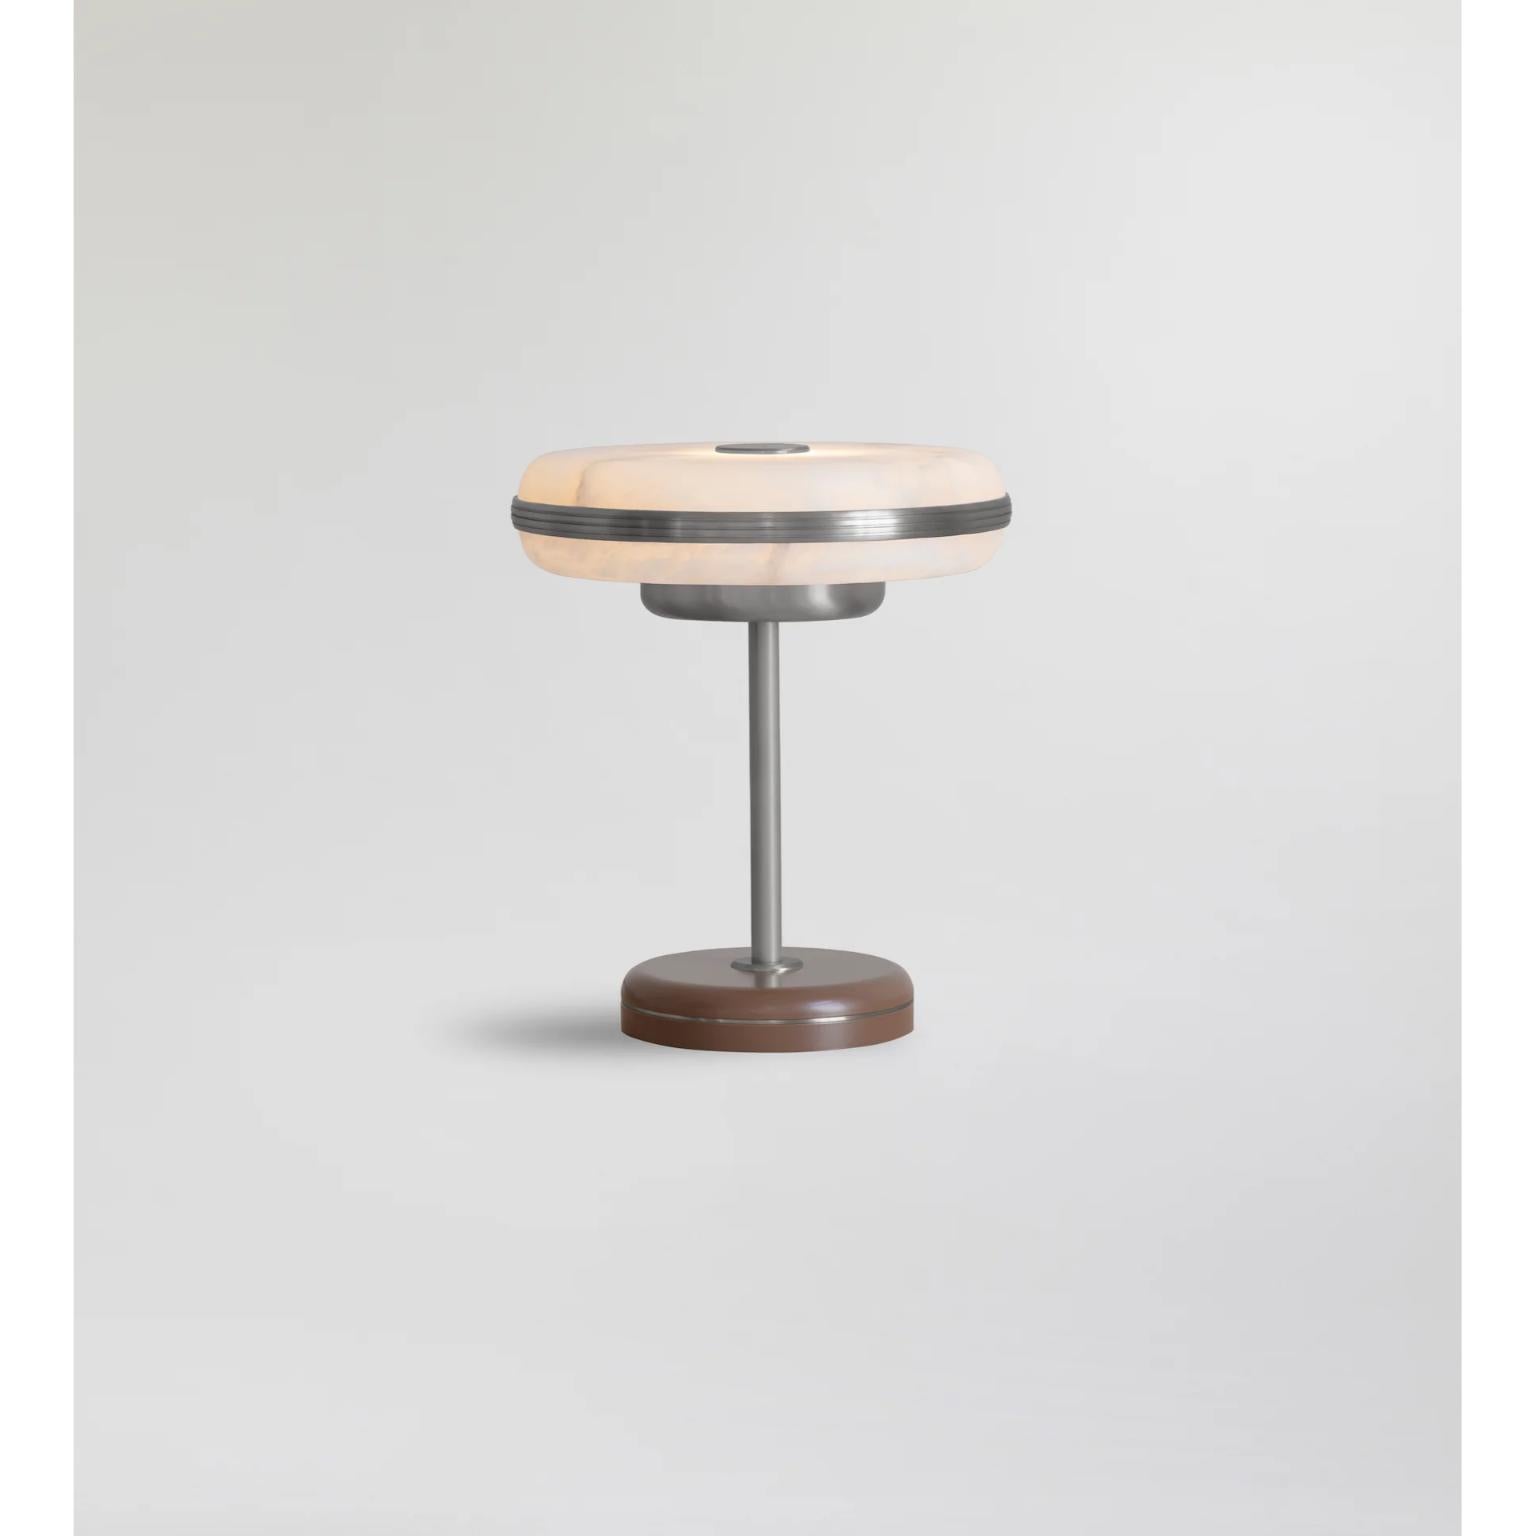 Beran Dark Bronze Small Table Lamp by Bert Frank
Dimensions: Ø 26 x H 28 cm.
Materials: Satin nickel and alabaster.
Base finish: Hazel.

Available in two different sizes. Available in different finishes and materials. Please contact us. 

The